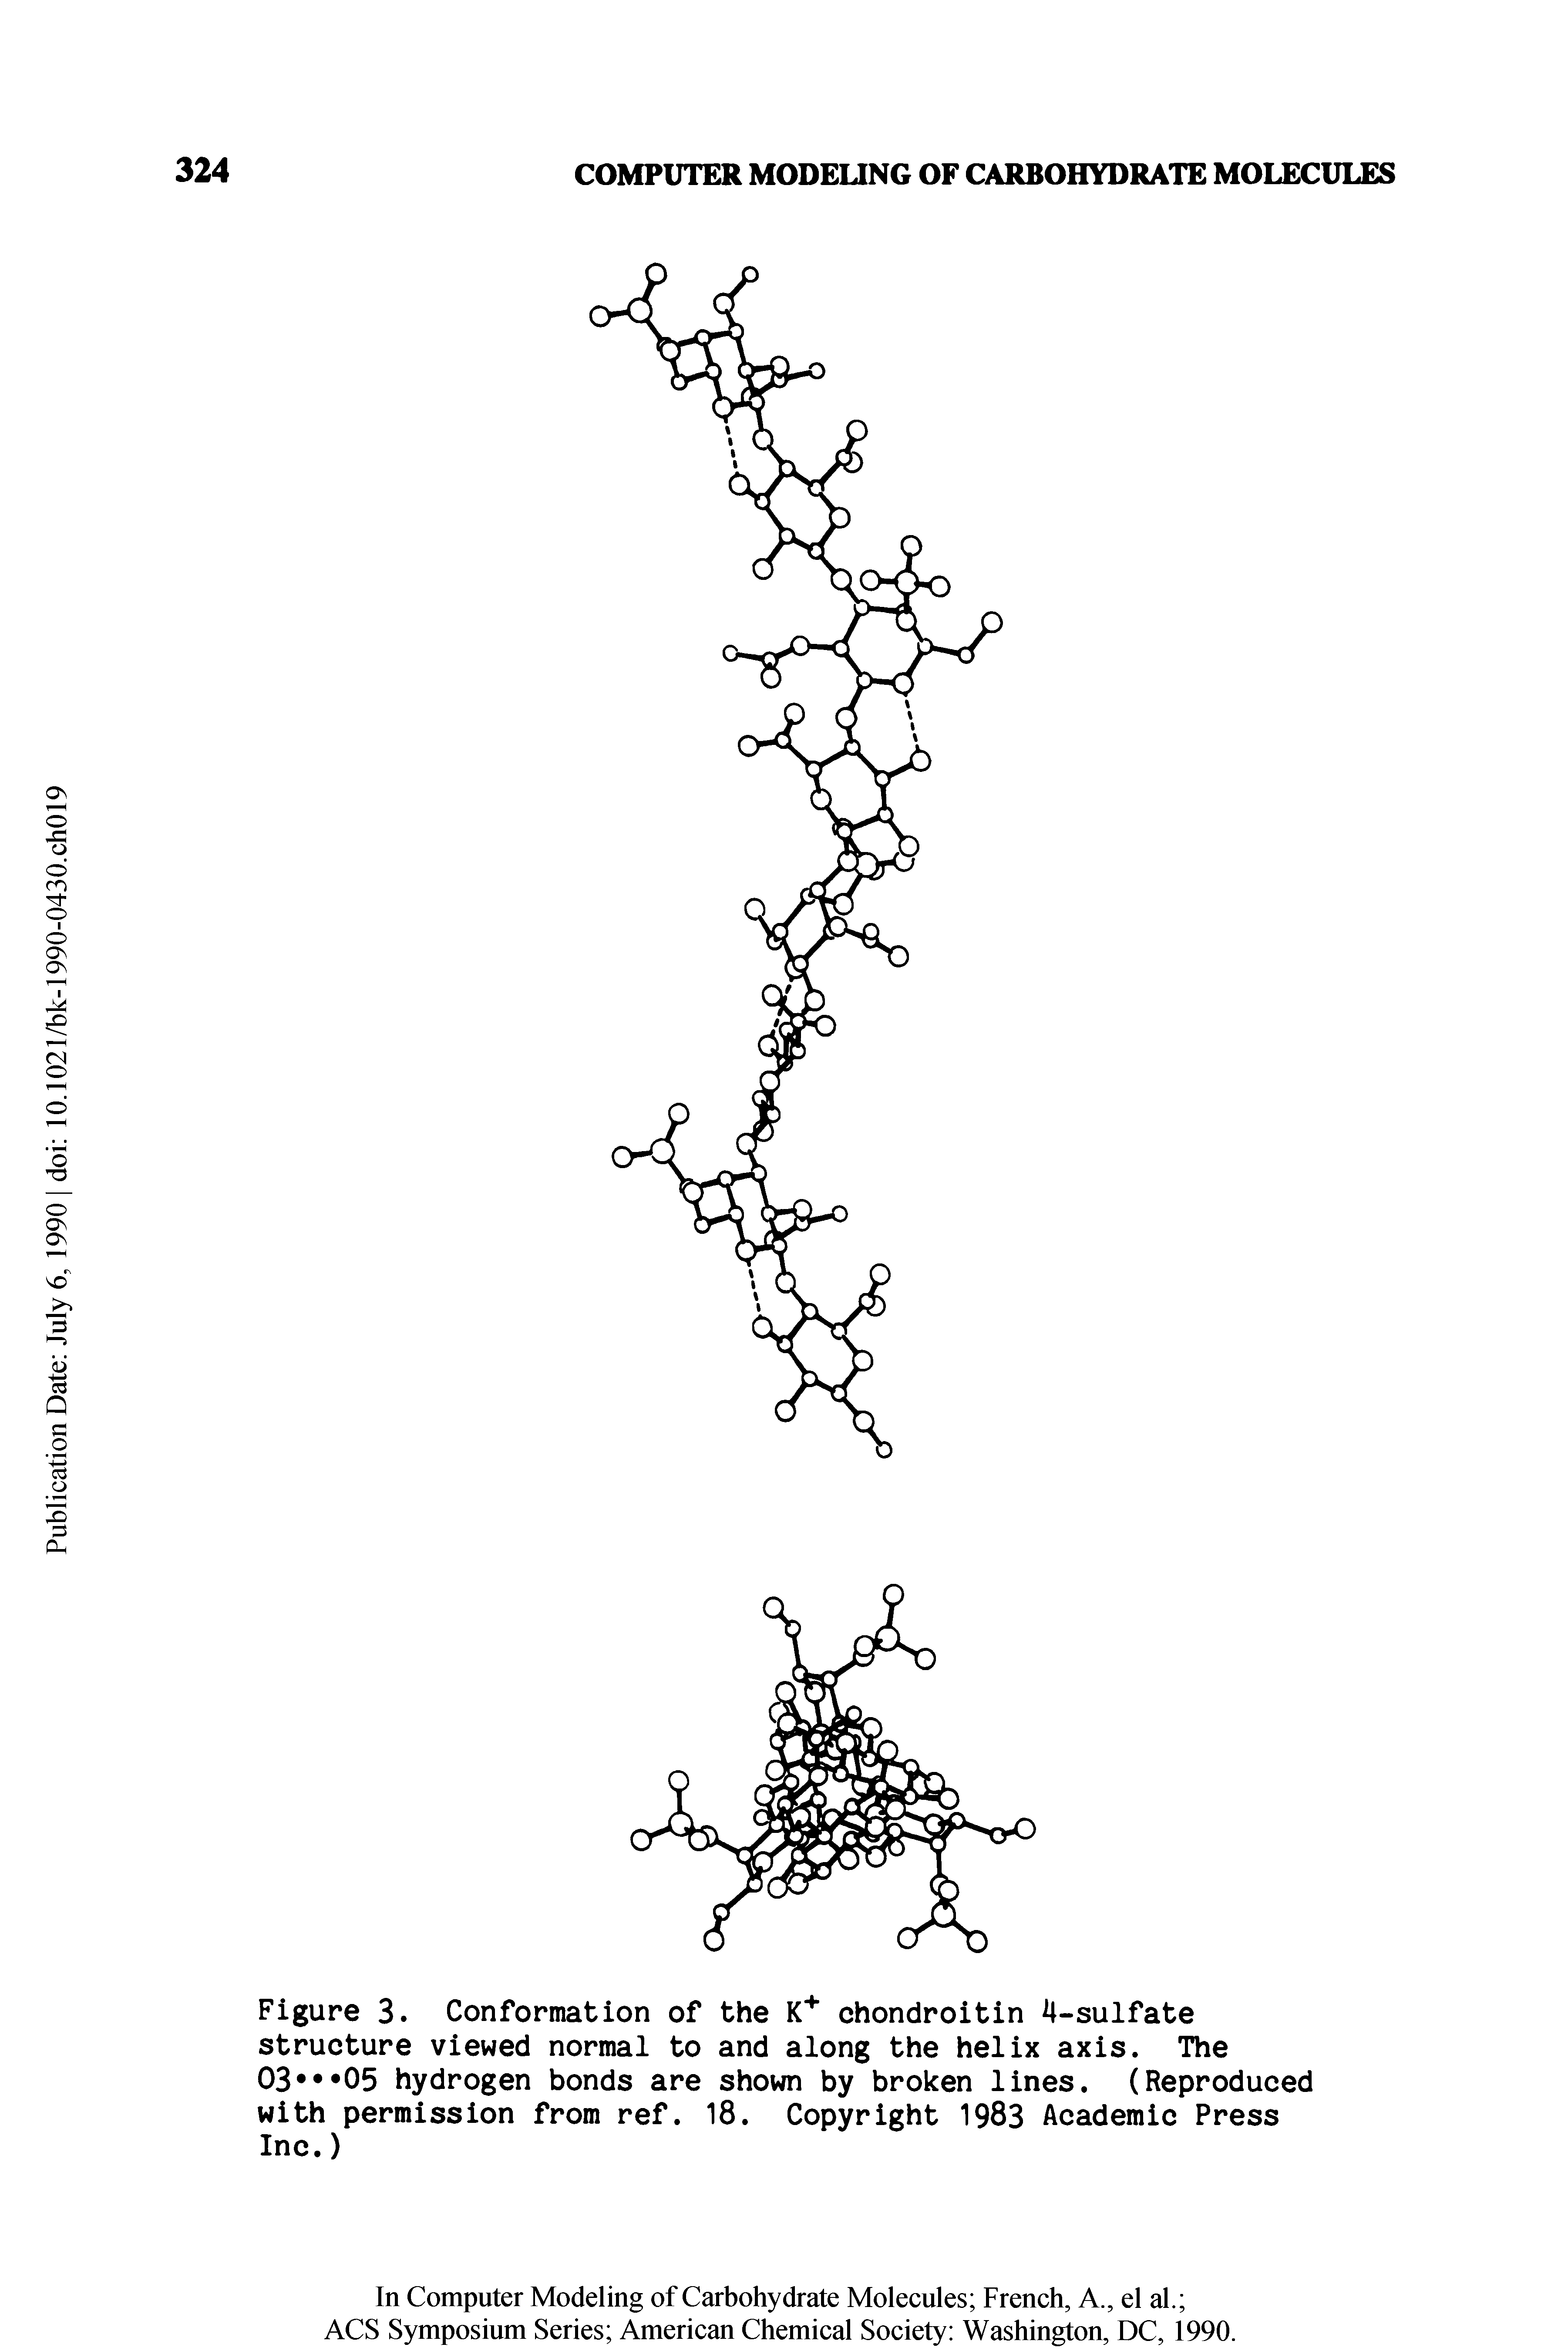 Figure 3. Conformation of the K chondroitin 4-sulfate structure viewed normal to and along the helix axis. The 03 05 hydrogen bonds are shown by broken lines. (Reproduced with permission from ref. 18. Copyright 1983 Academic Press Inc.)...